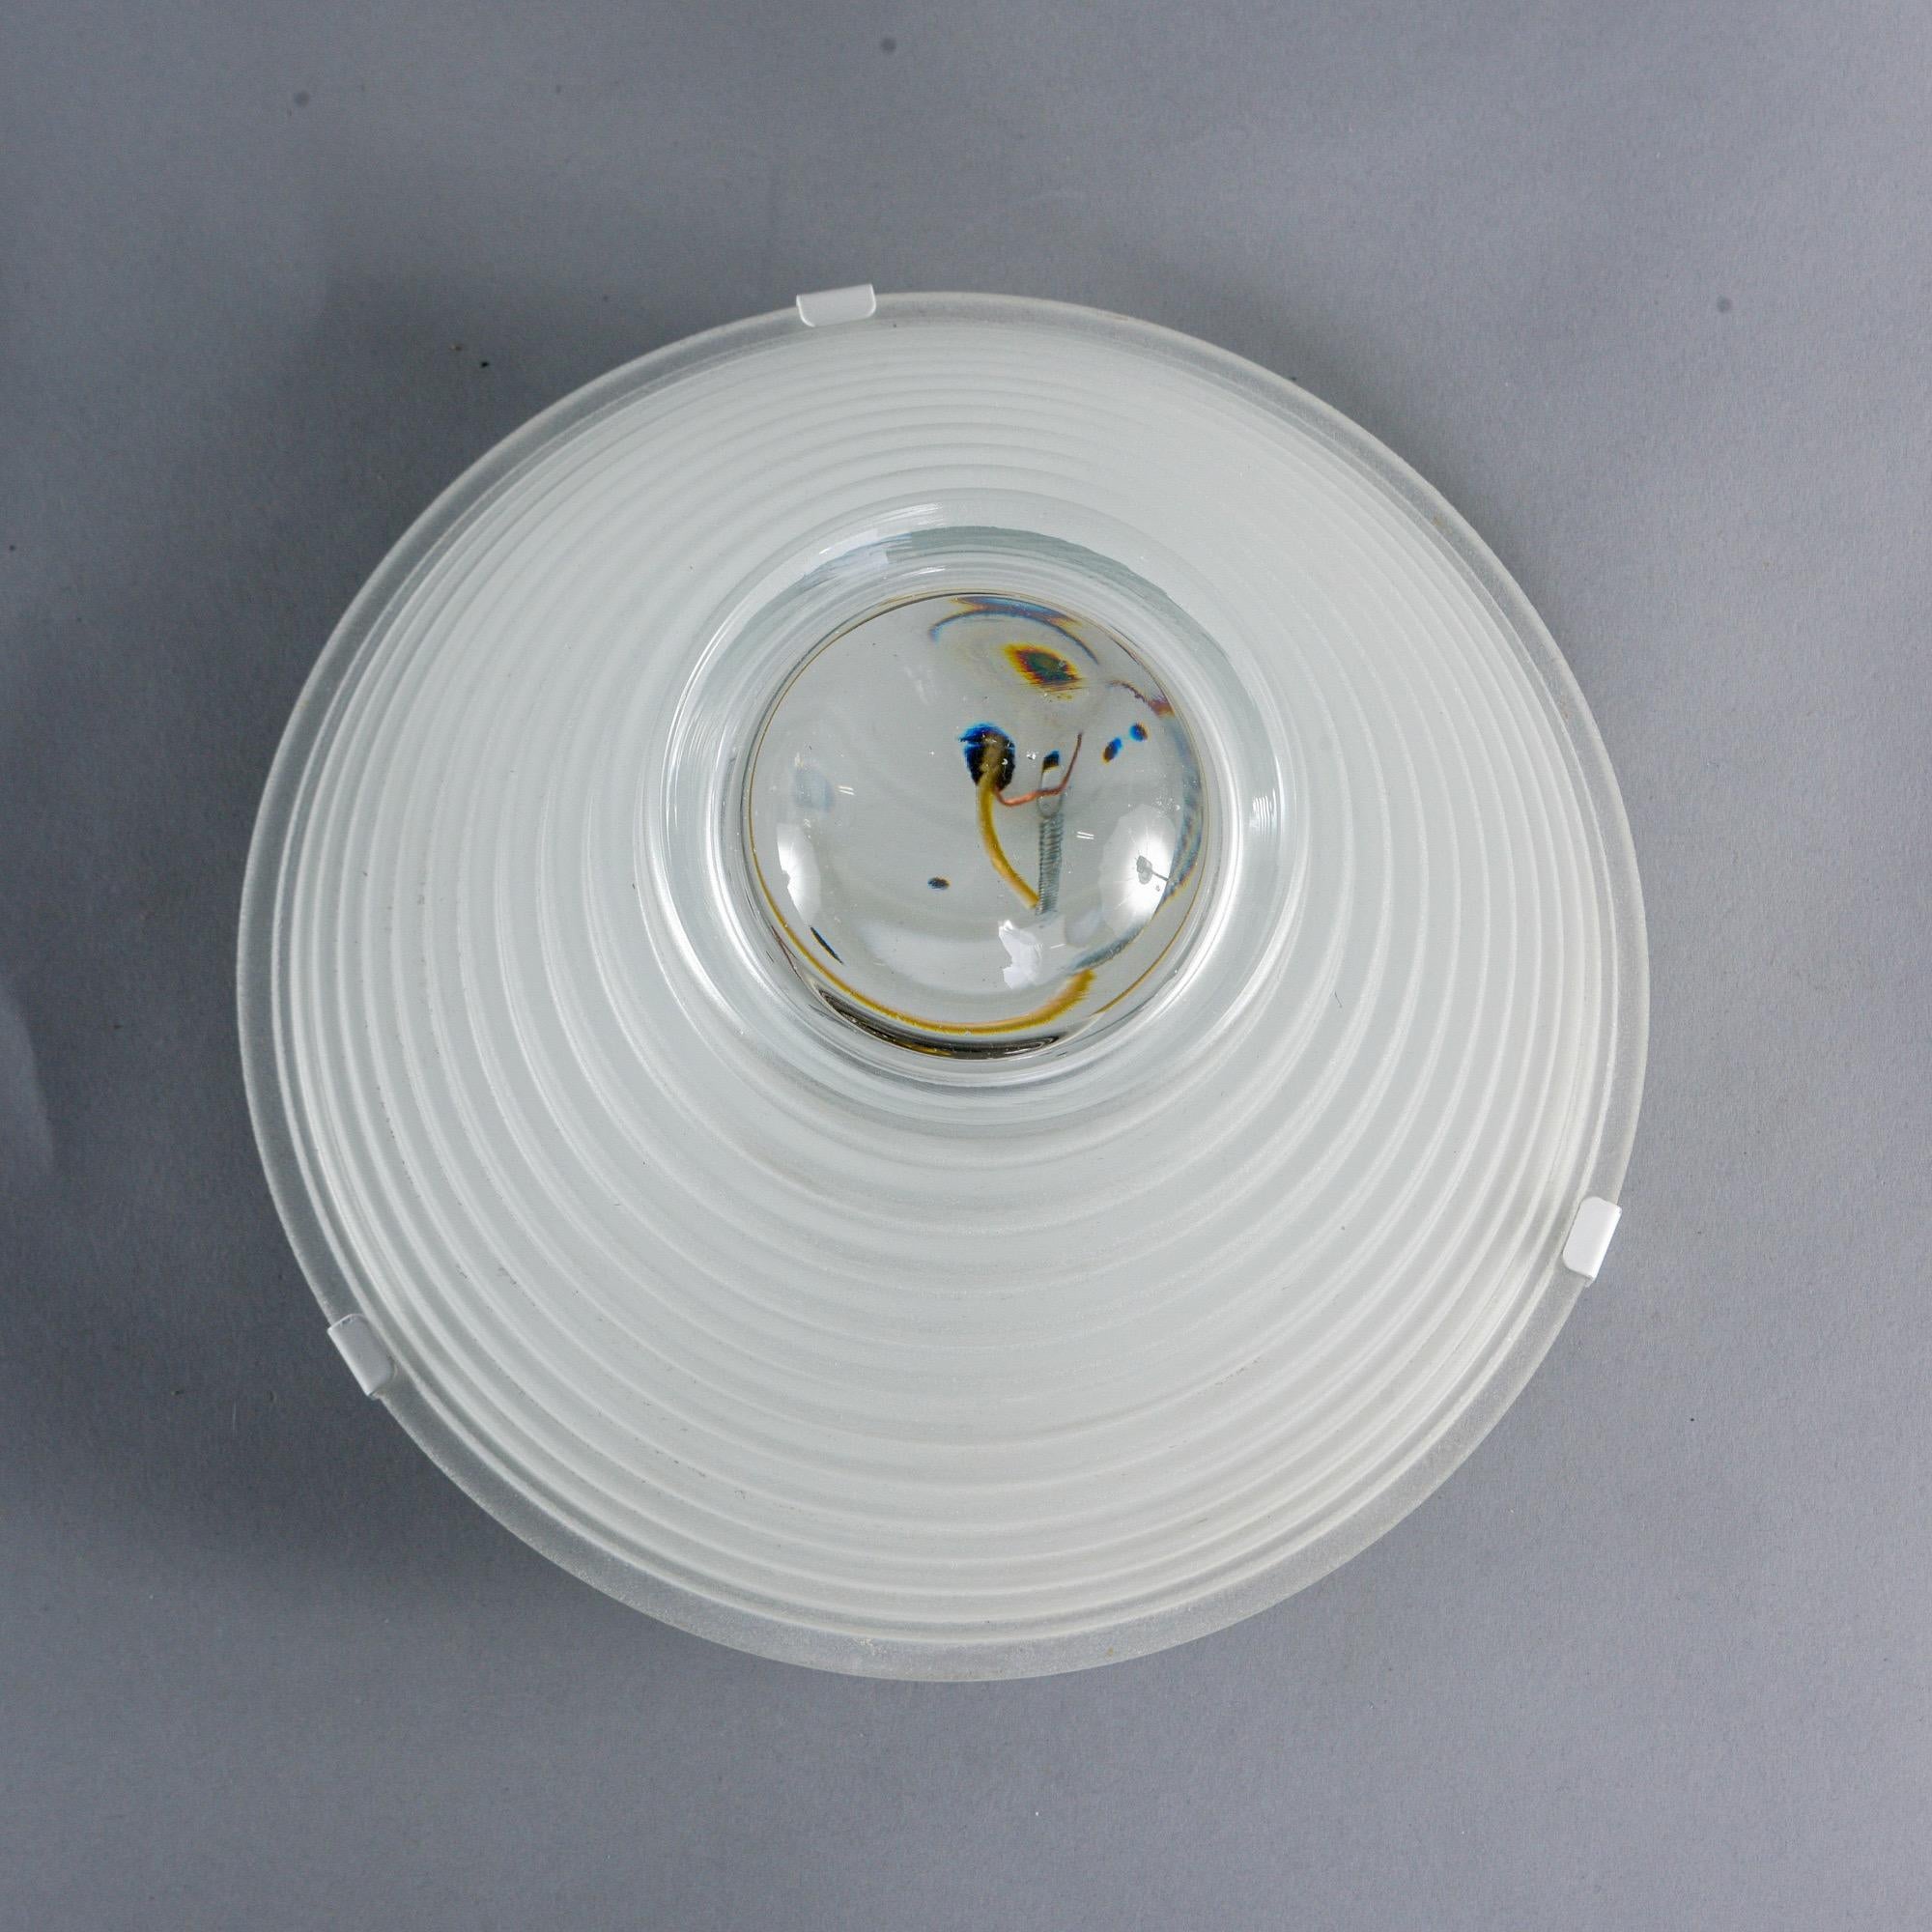 Industrial style flushmount light by Angelo Mangiarotti for Artemide of Italy, circa 1970. Thick, sandblasted ridged and graduated glass shades have a center magnifying lens. New wiring for US electrical standards.
 